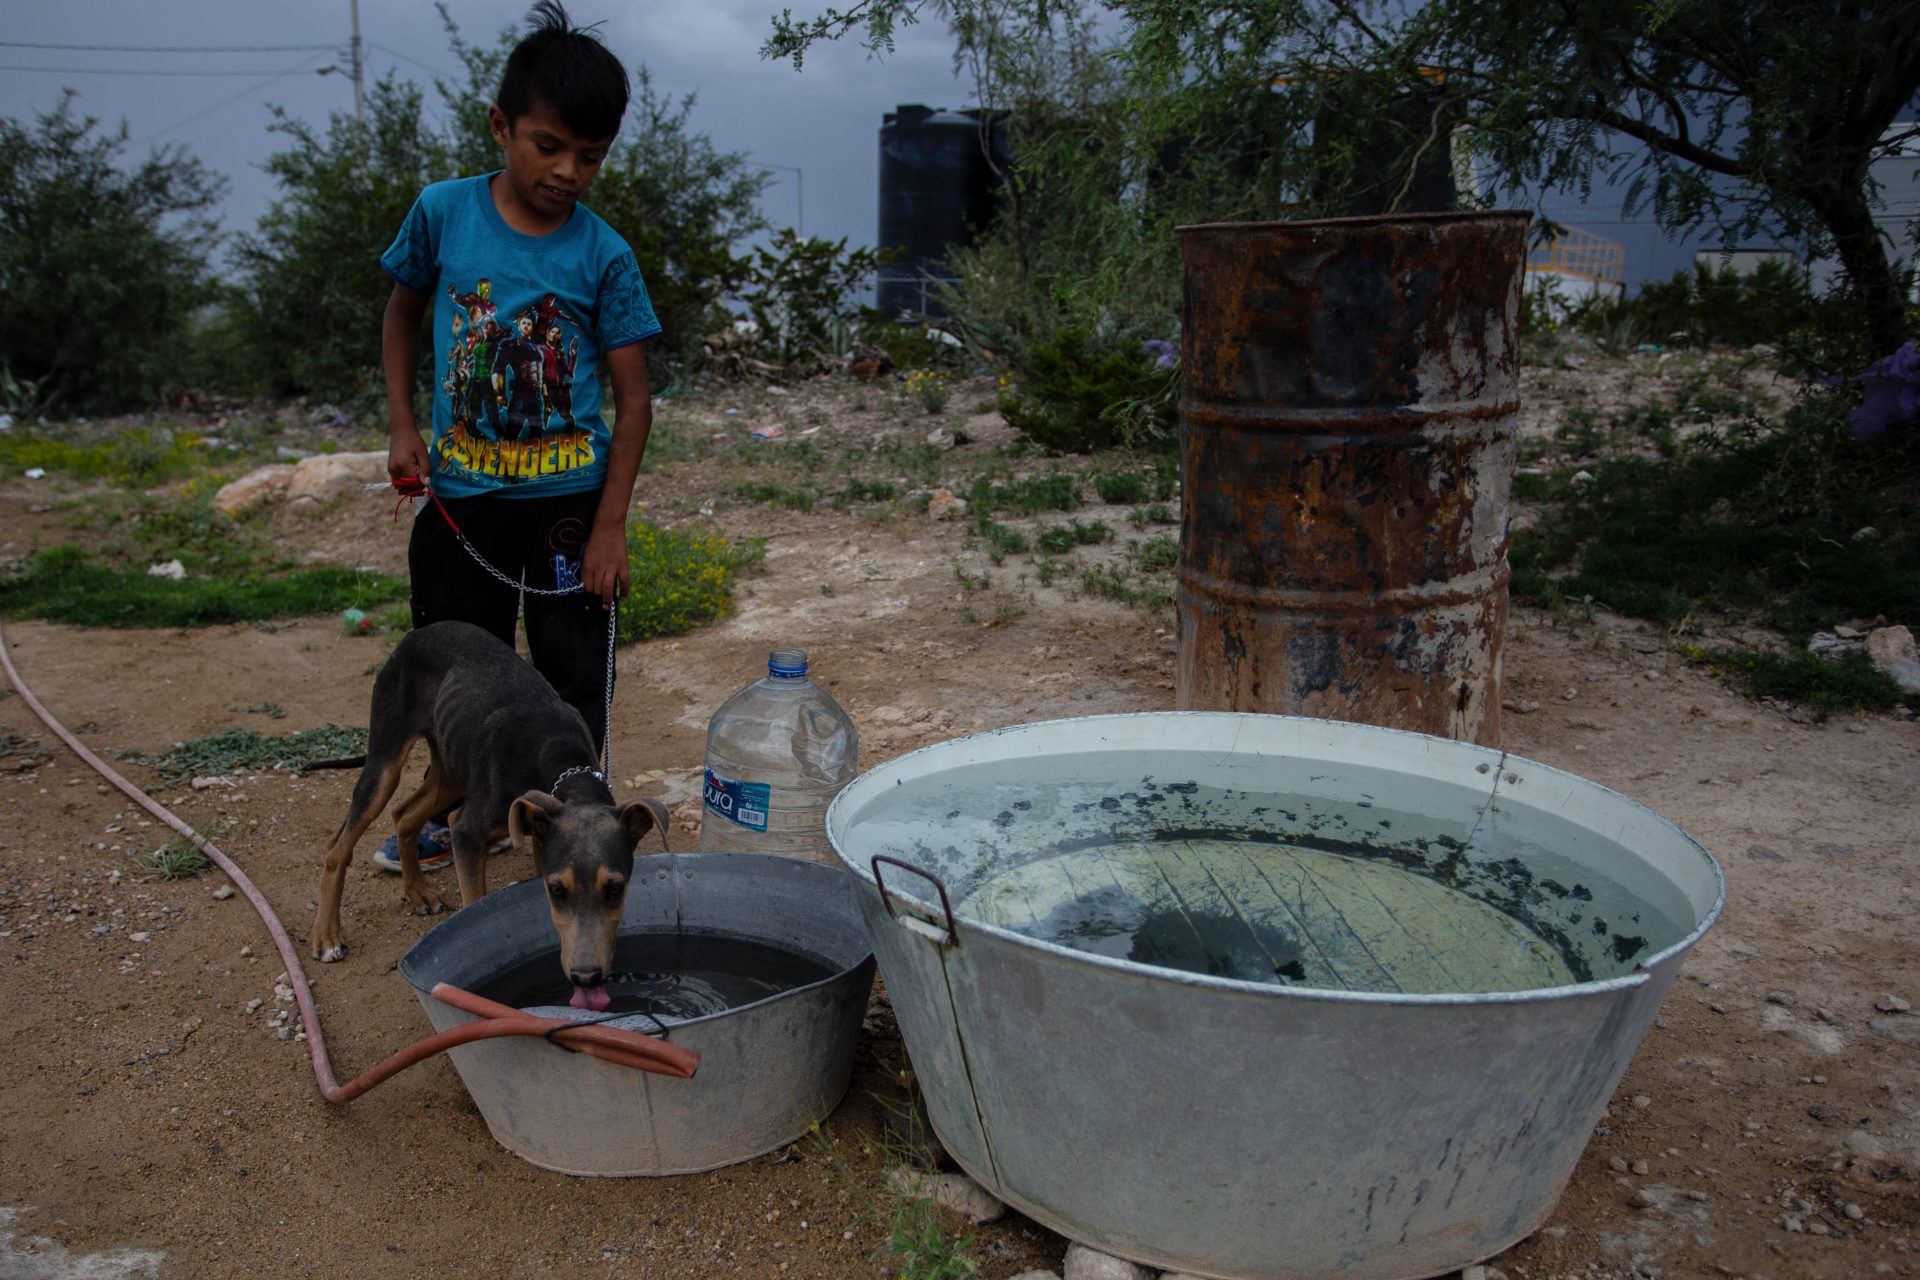 In Zacatecas, a boy watches a dog drink water.